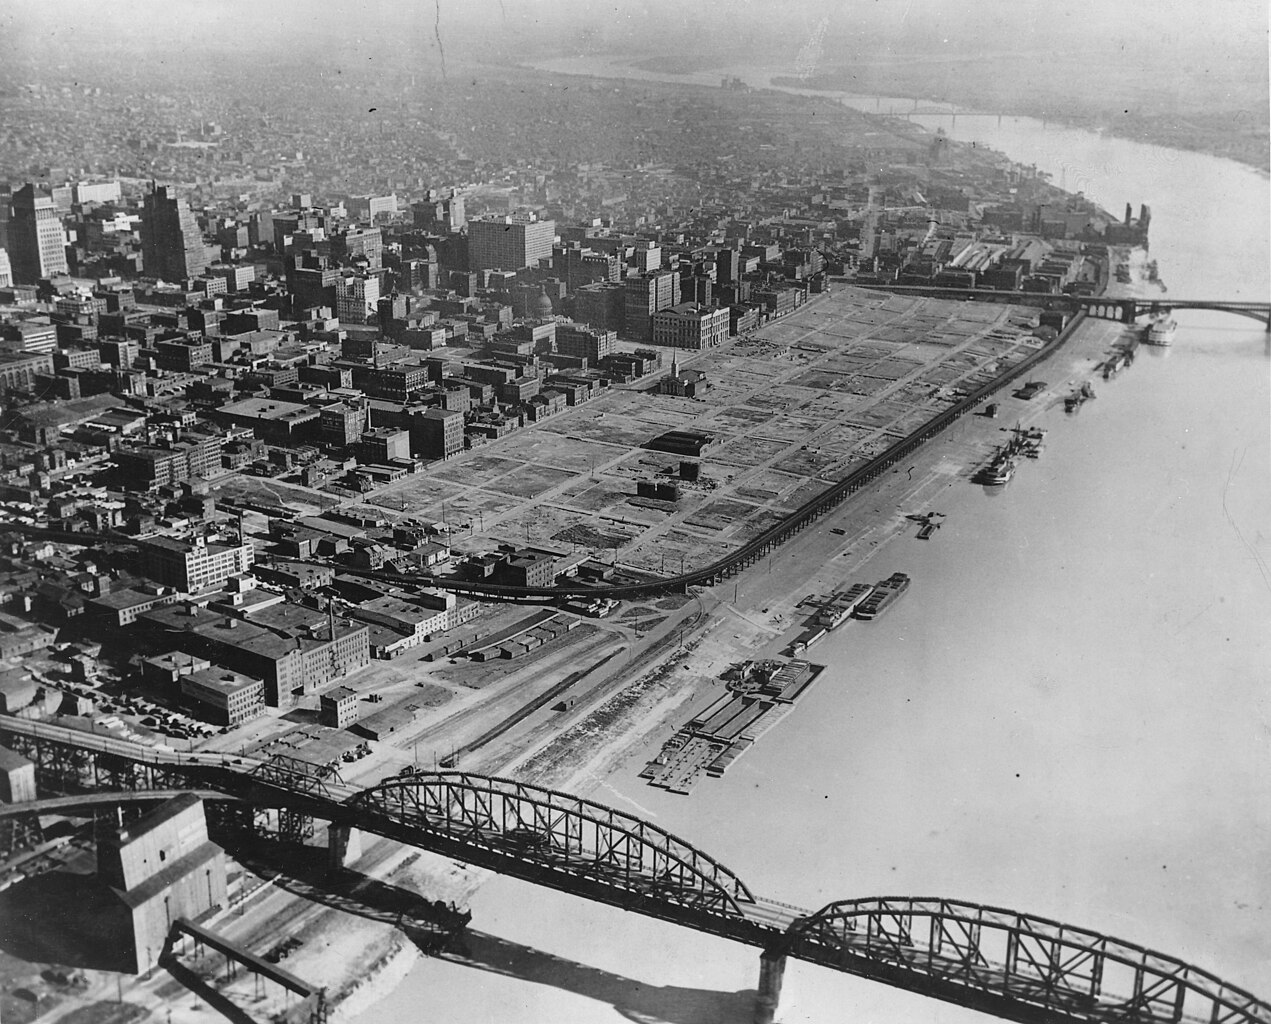 File:St. Louis riverfront after demolition for Gateway Arch (1942).jpg - Wikimedia Commons